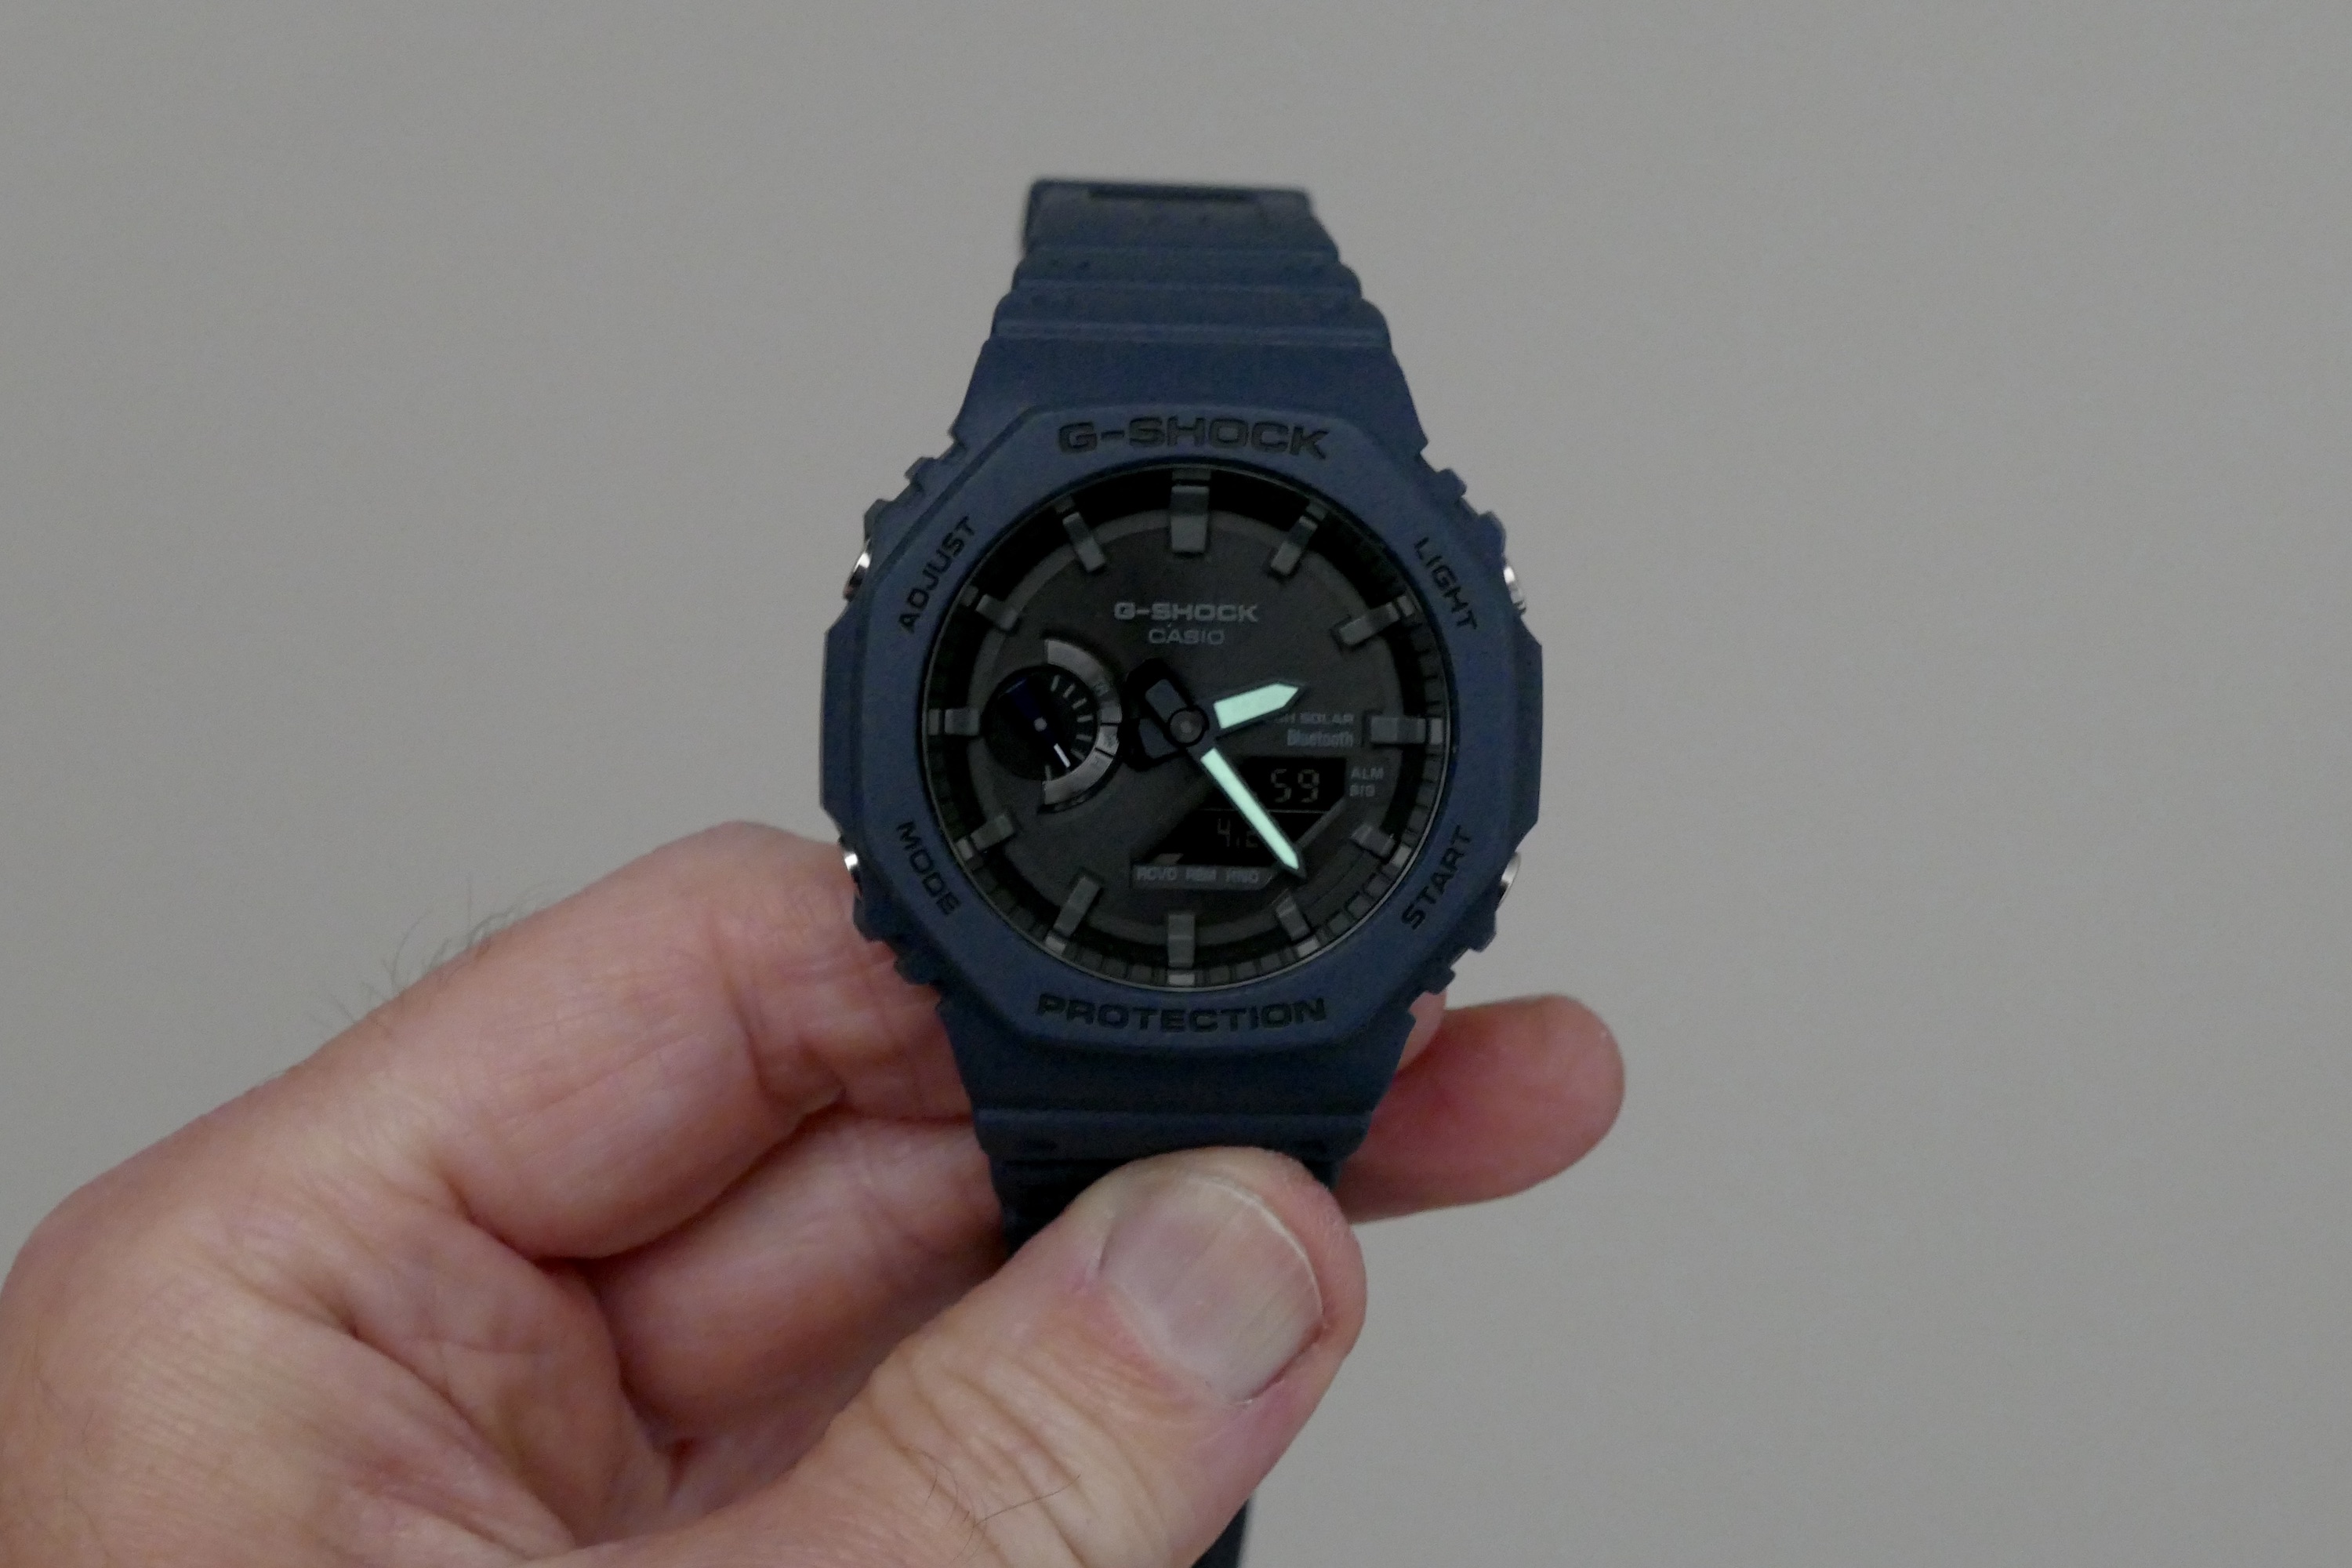 The tech-boosted G-Shock is Digital great a | watch Trends GA-B2100 buy